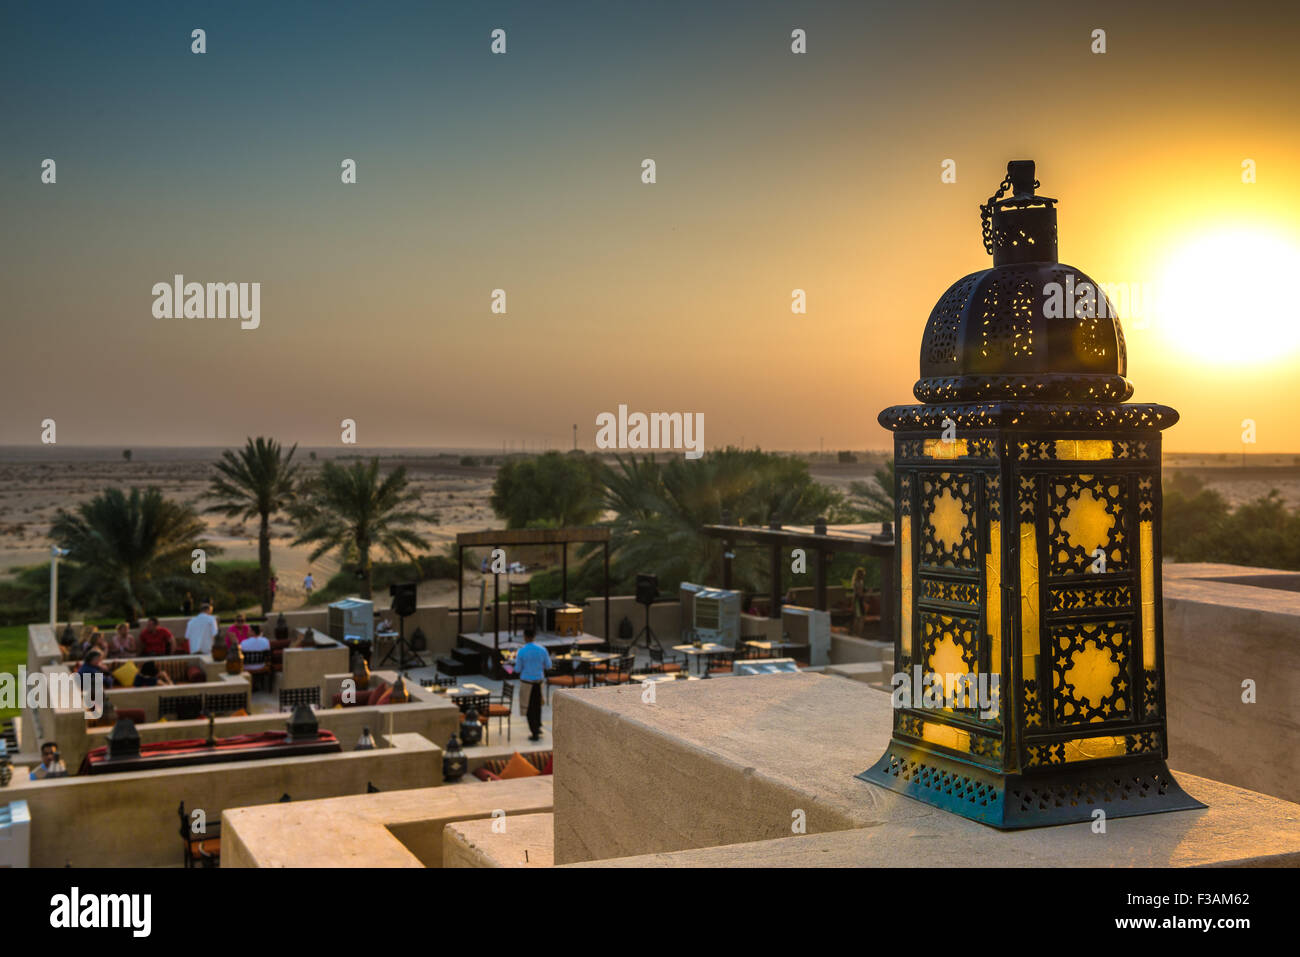 Sunset over the Dubai desert as seen from the Al Sarab rooftop lounge at the Bab Al Shams Resort Stock Photo